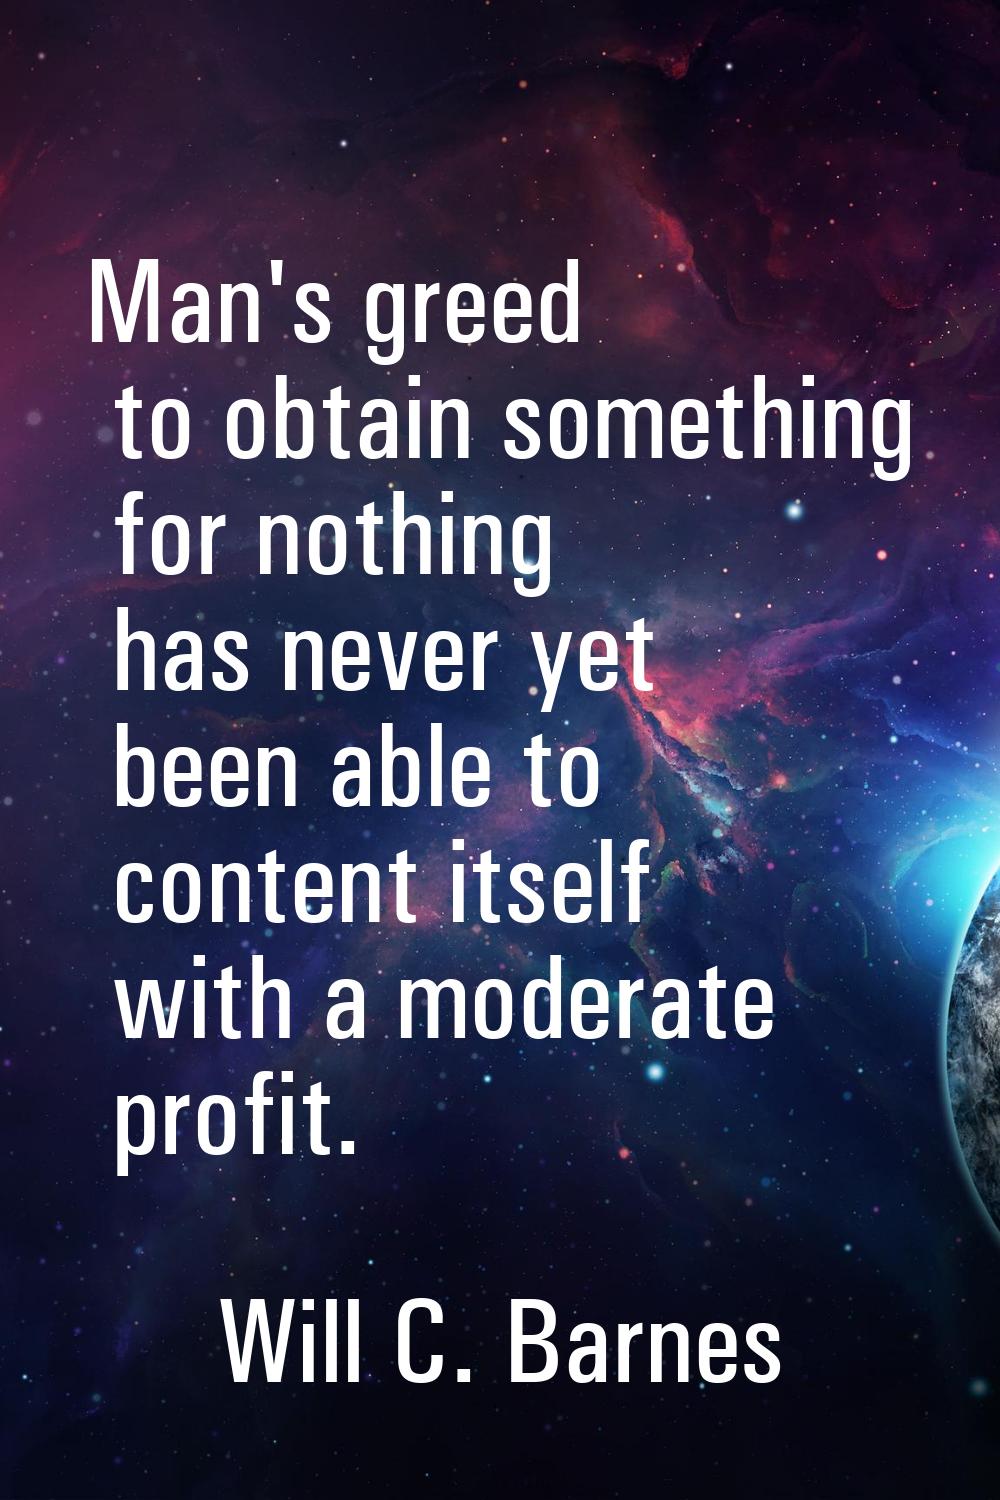 Man's greed to obtain something for nothing has never yet been able to content itself with a modera